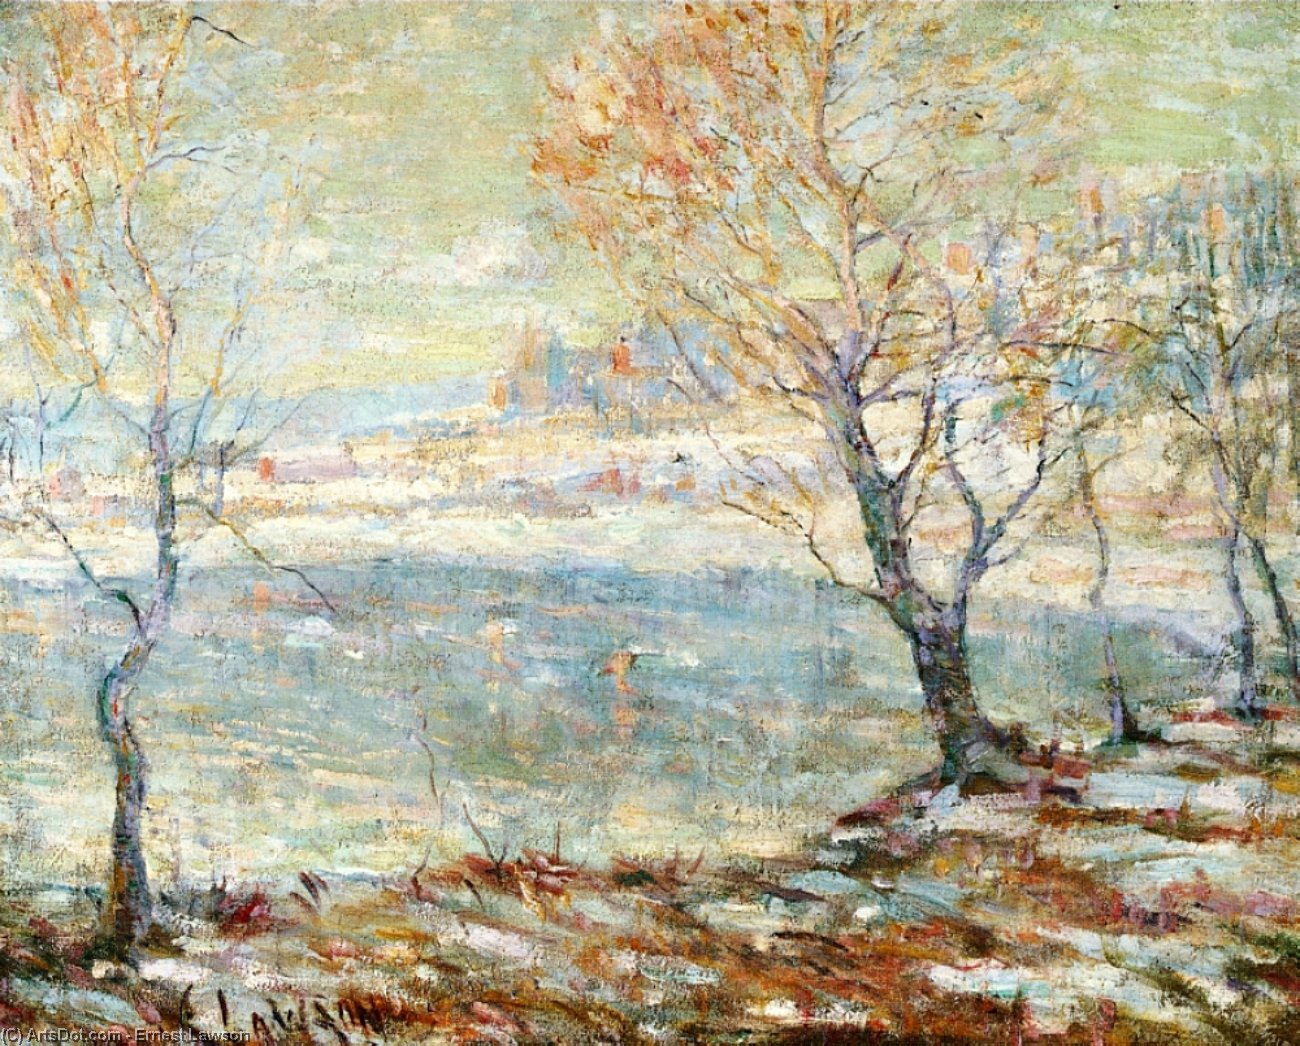 Buy Museum Art Reproductions Inwood on Hudson, In the Snow, 1905 by Ernest Lawson (1873-1939, Canada) | ArtsDot.com